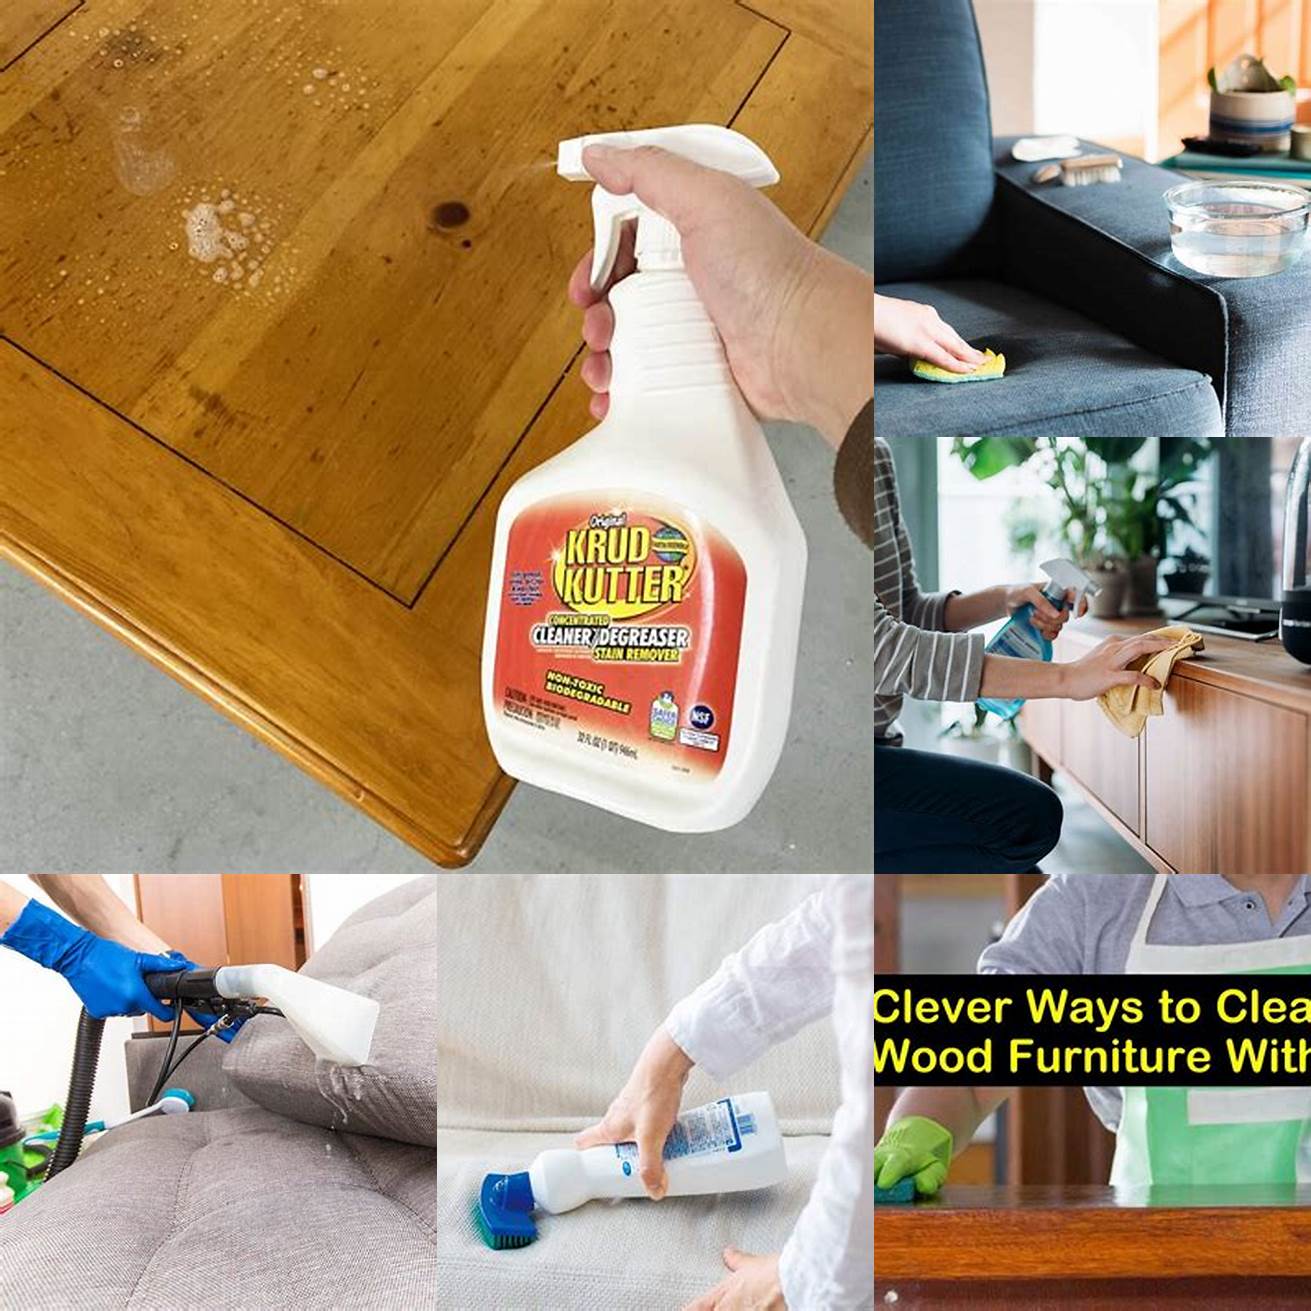 Prepare the cleaning solution